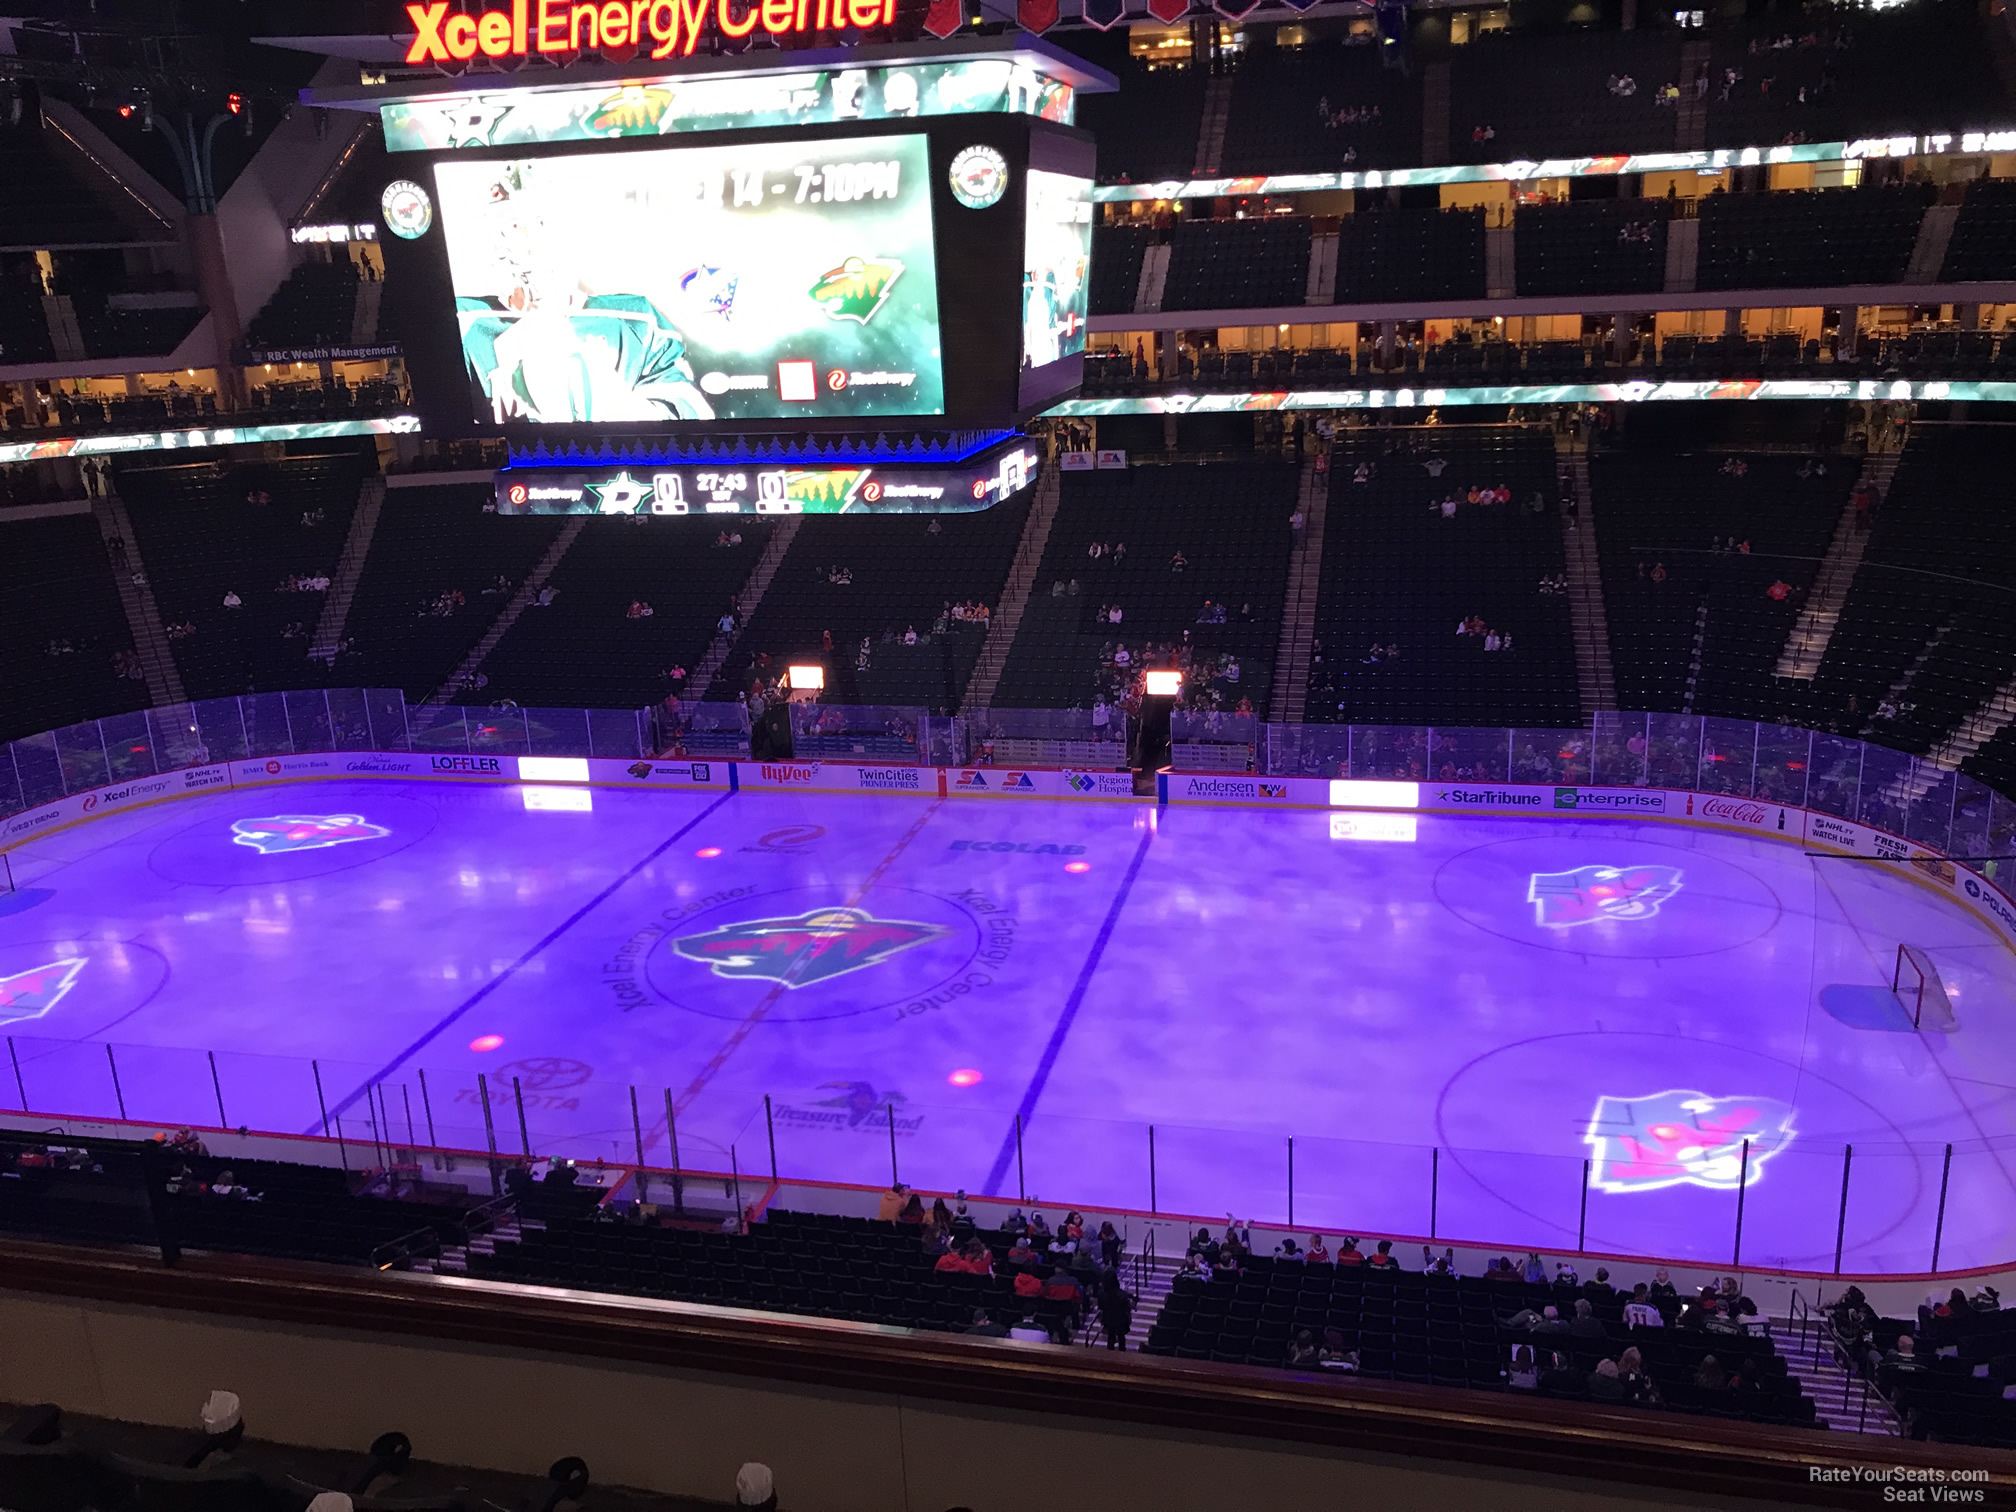 section c4, row 5 seat view  for hockey - xcel energy center